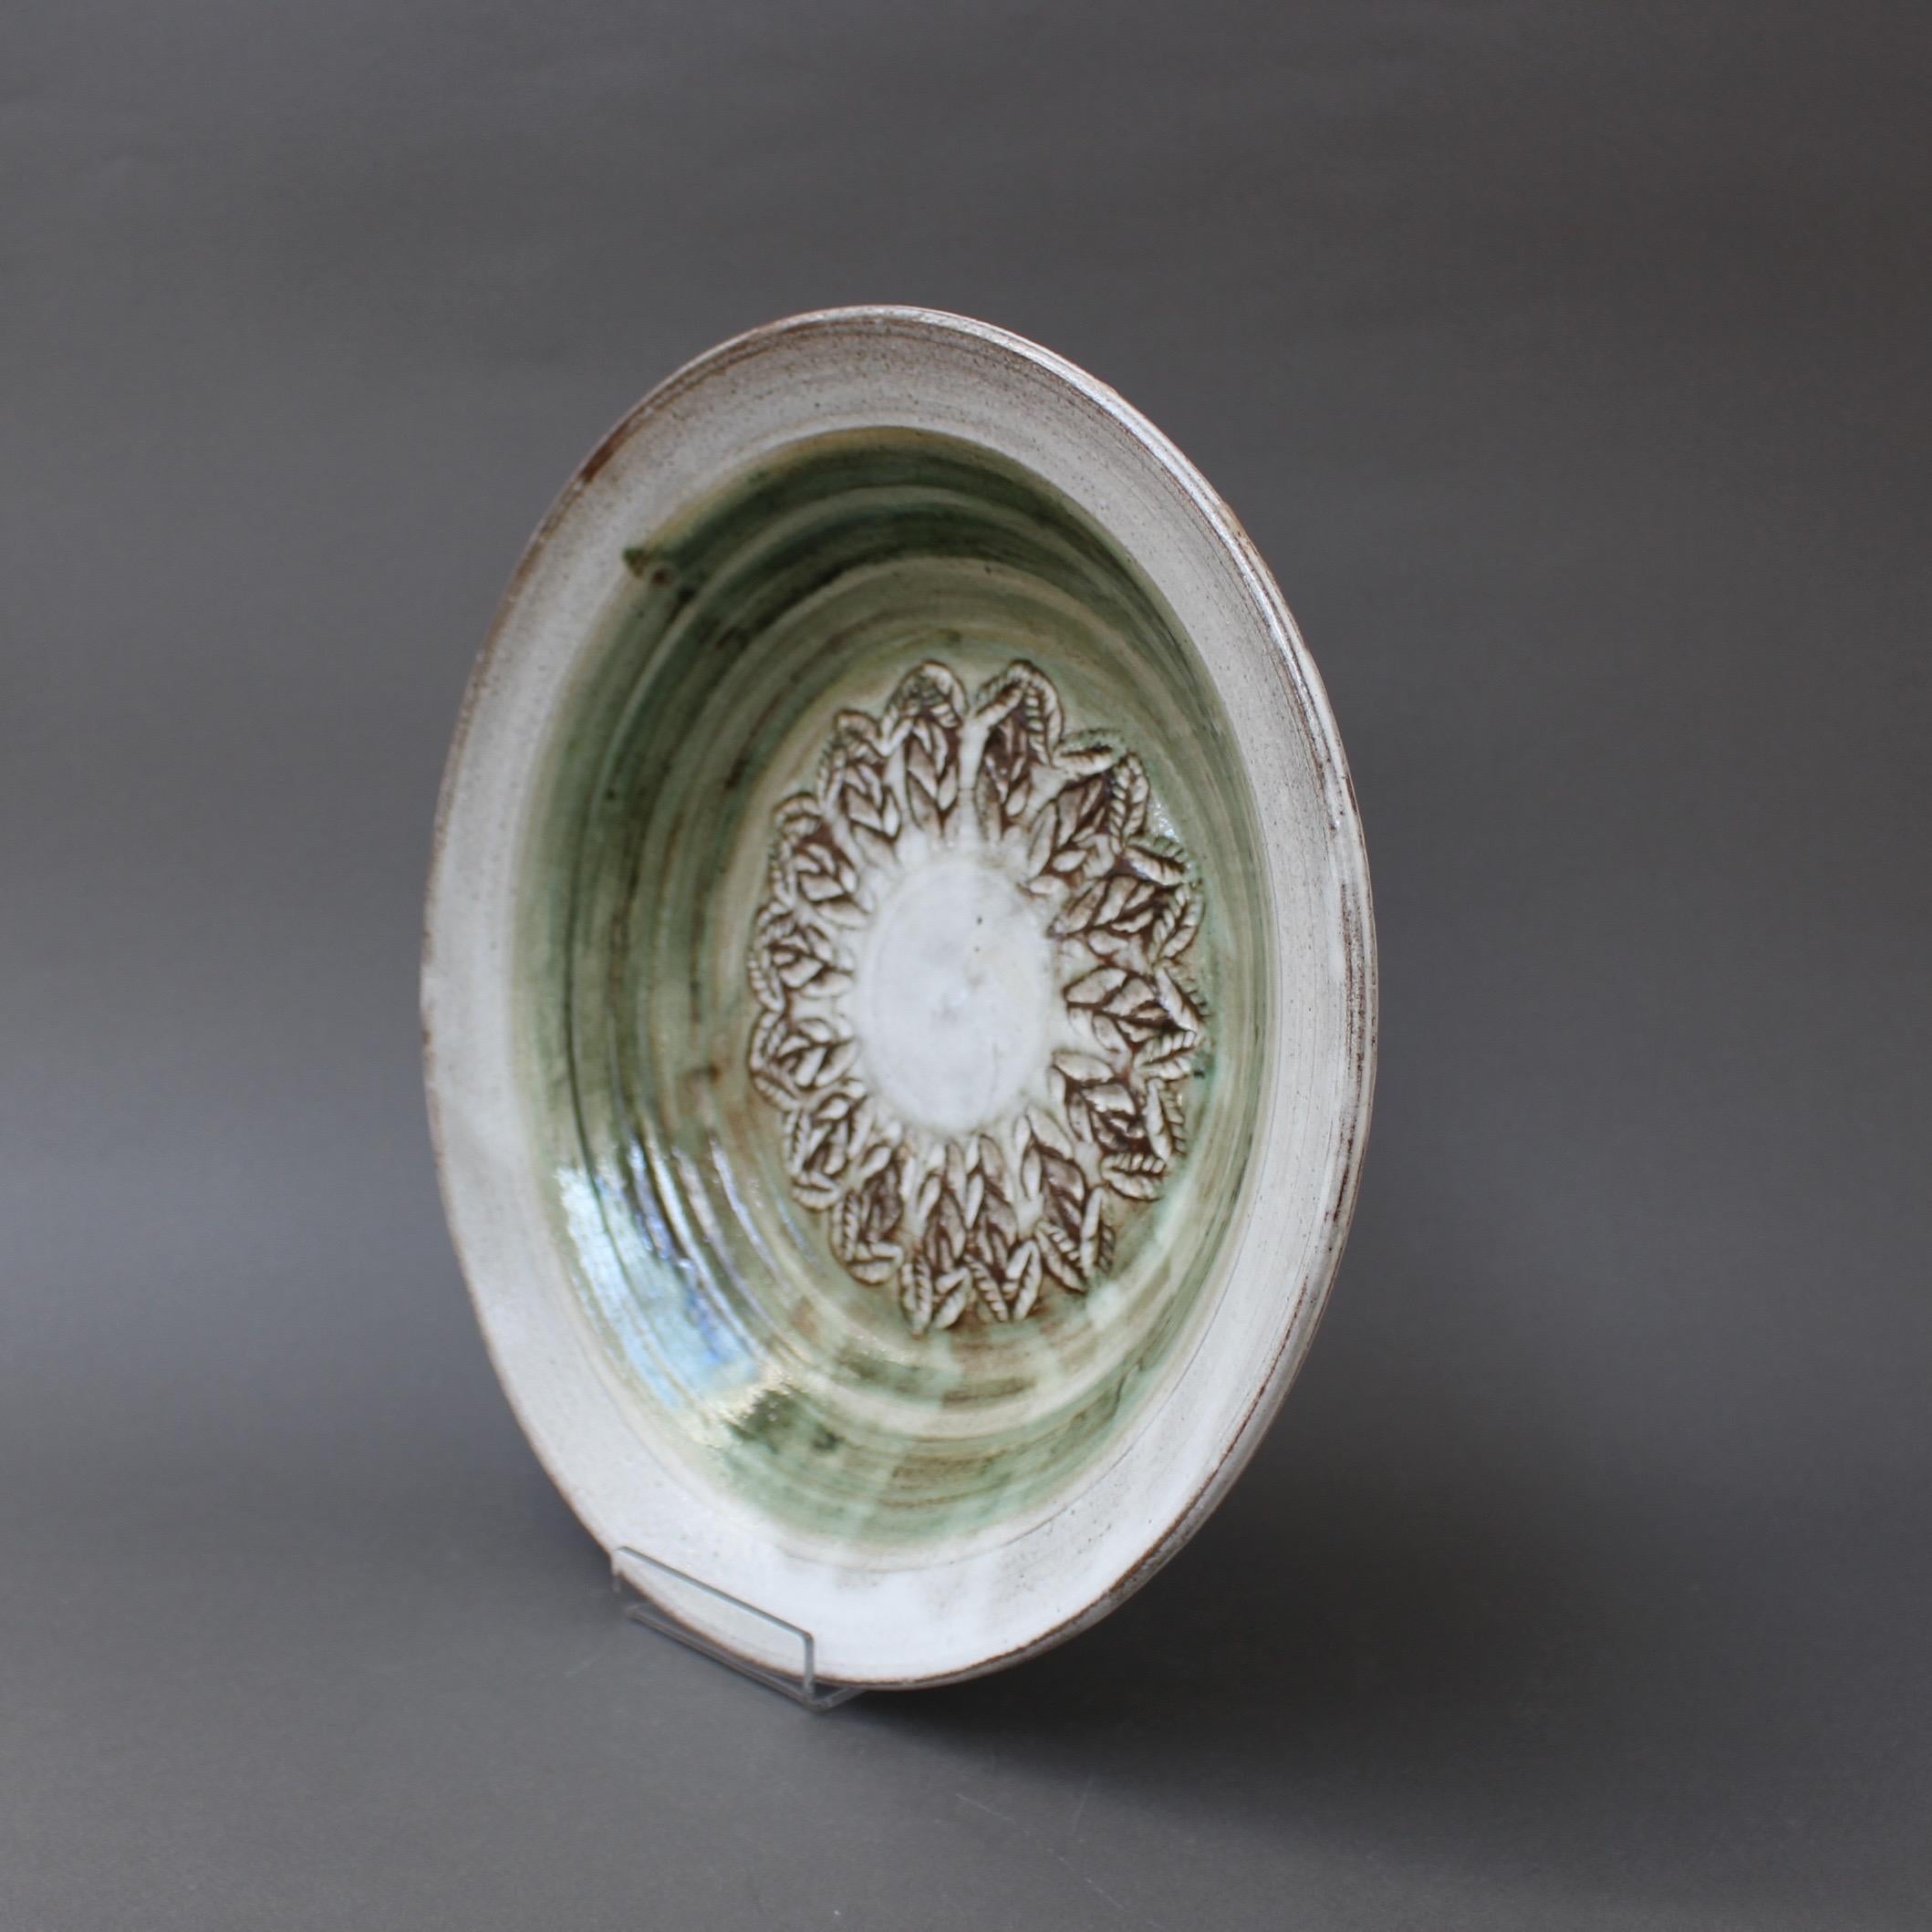 French Midcentury Decorative Ceramic Bowl by Albert Thiry, Vallauris, France, c. 1960s